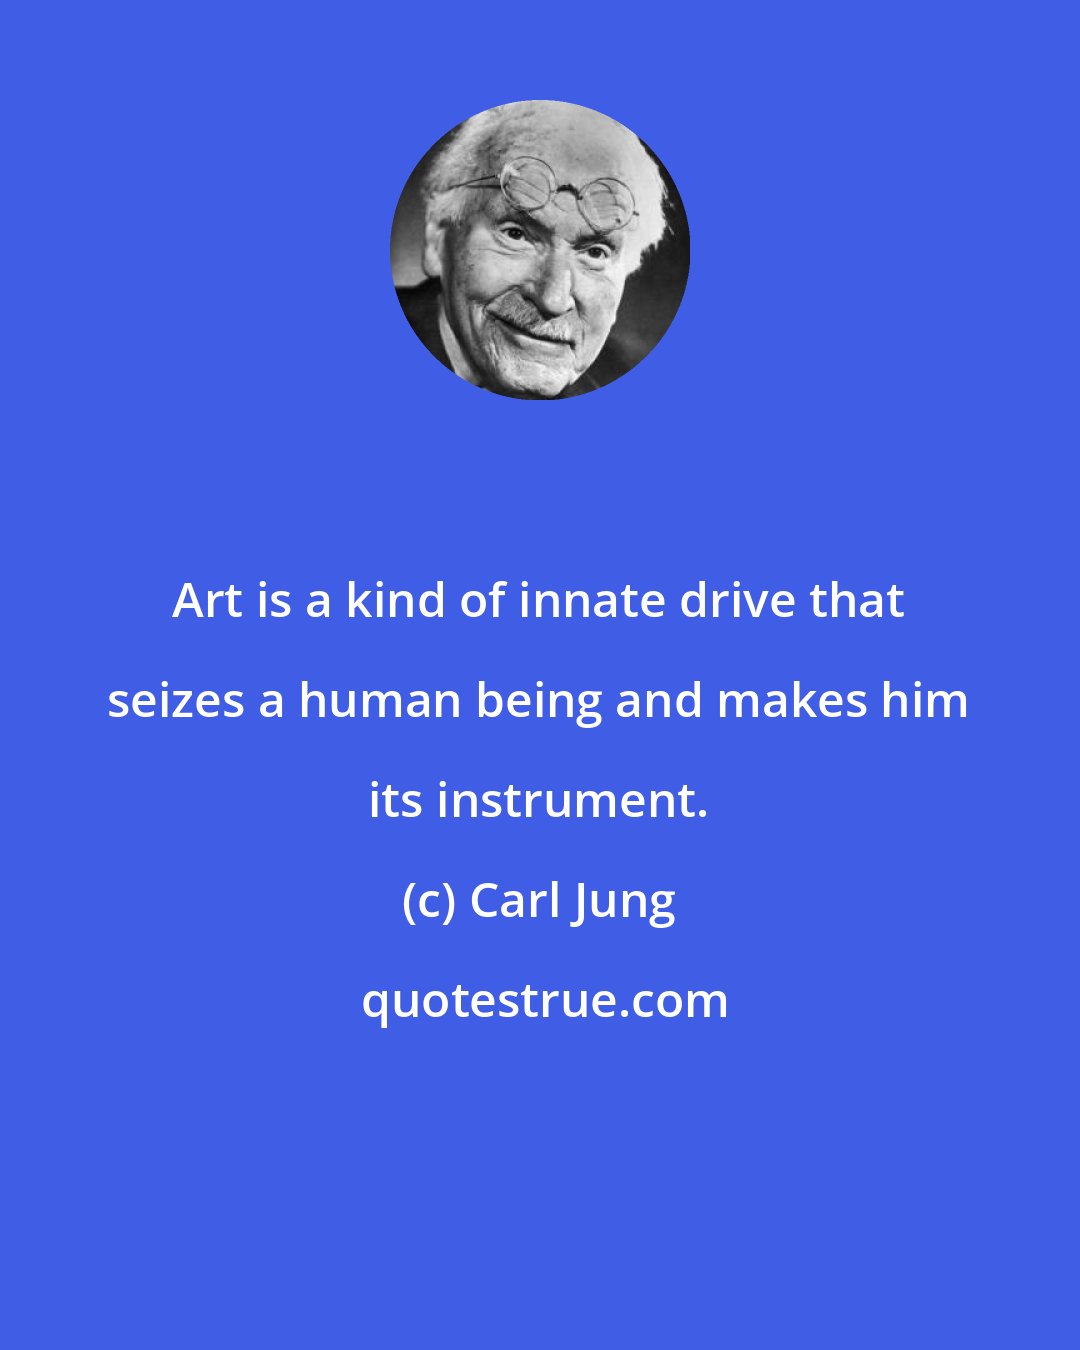 Carl Jung: Art is a kind of innate drive that seizes a human being and makes him its instrument.